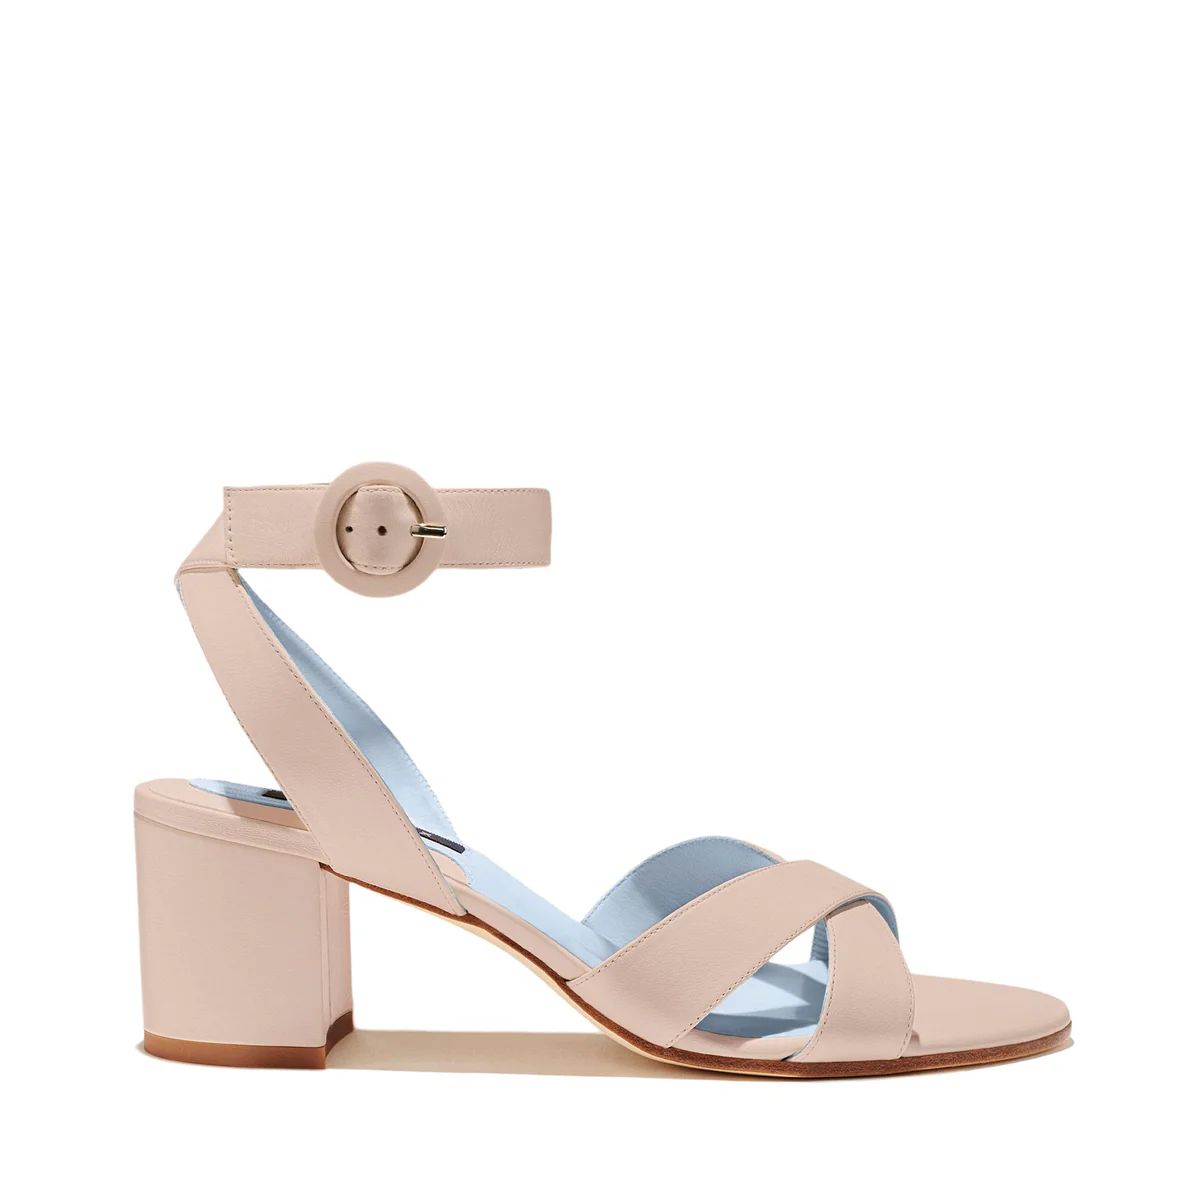 The City Sandal in Blush Nappa | Over The Moon